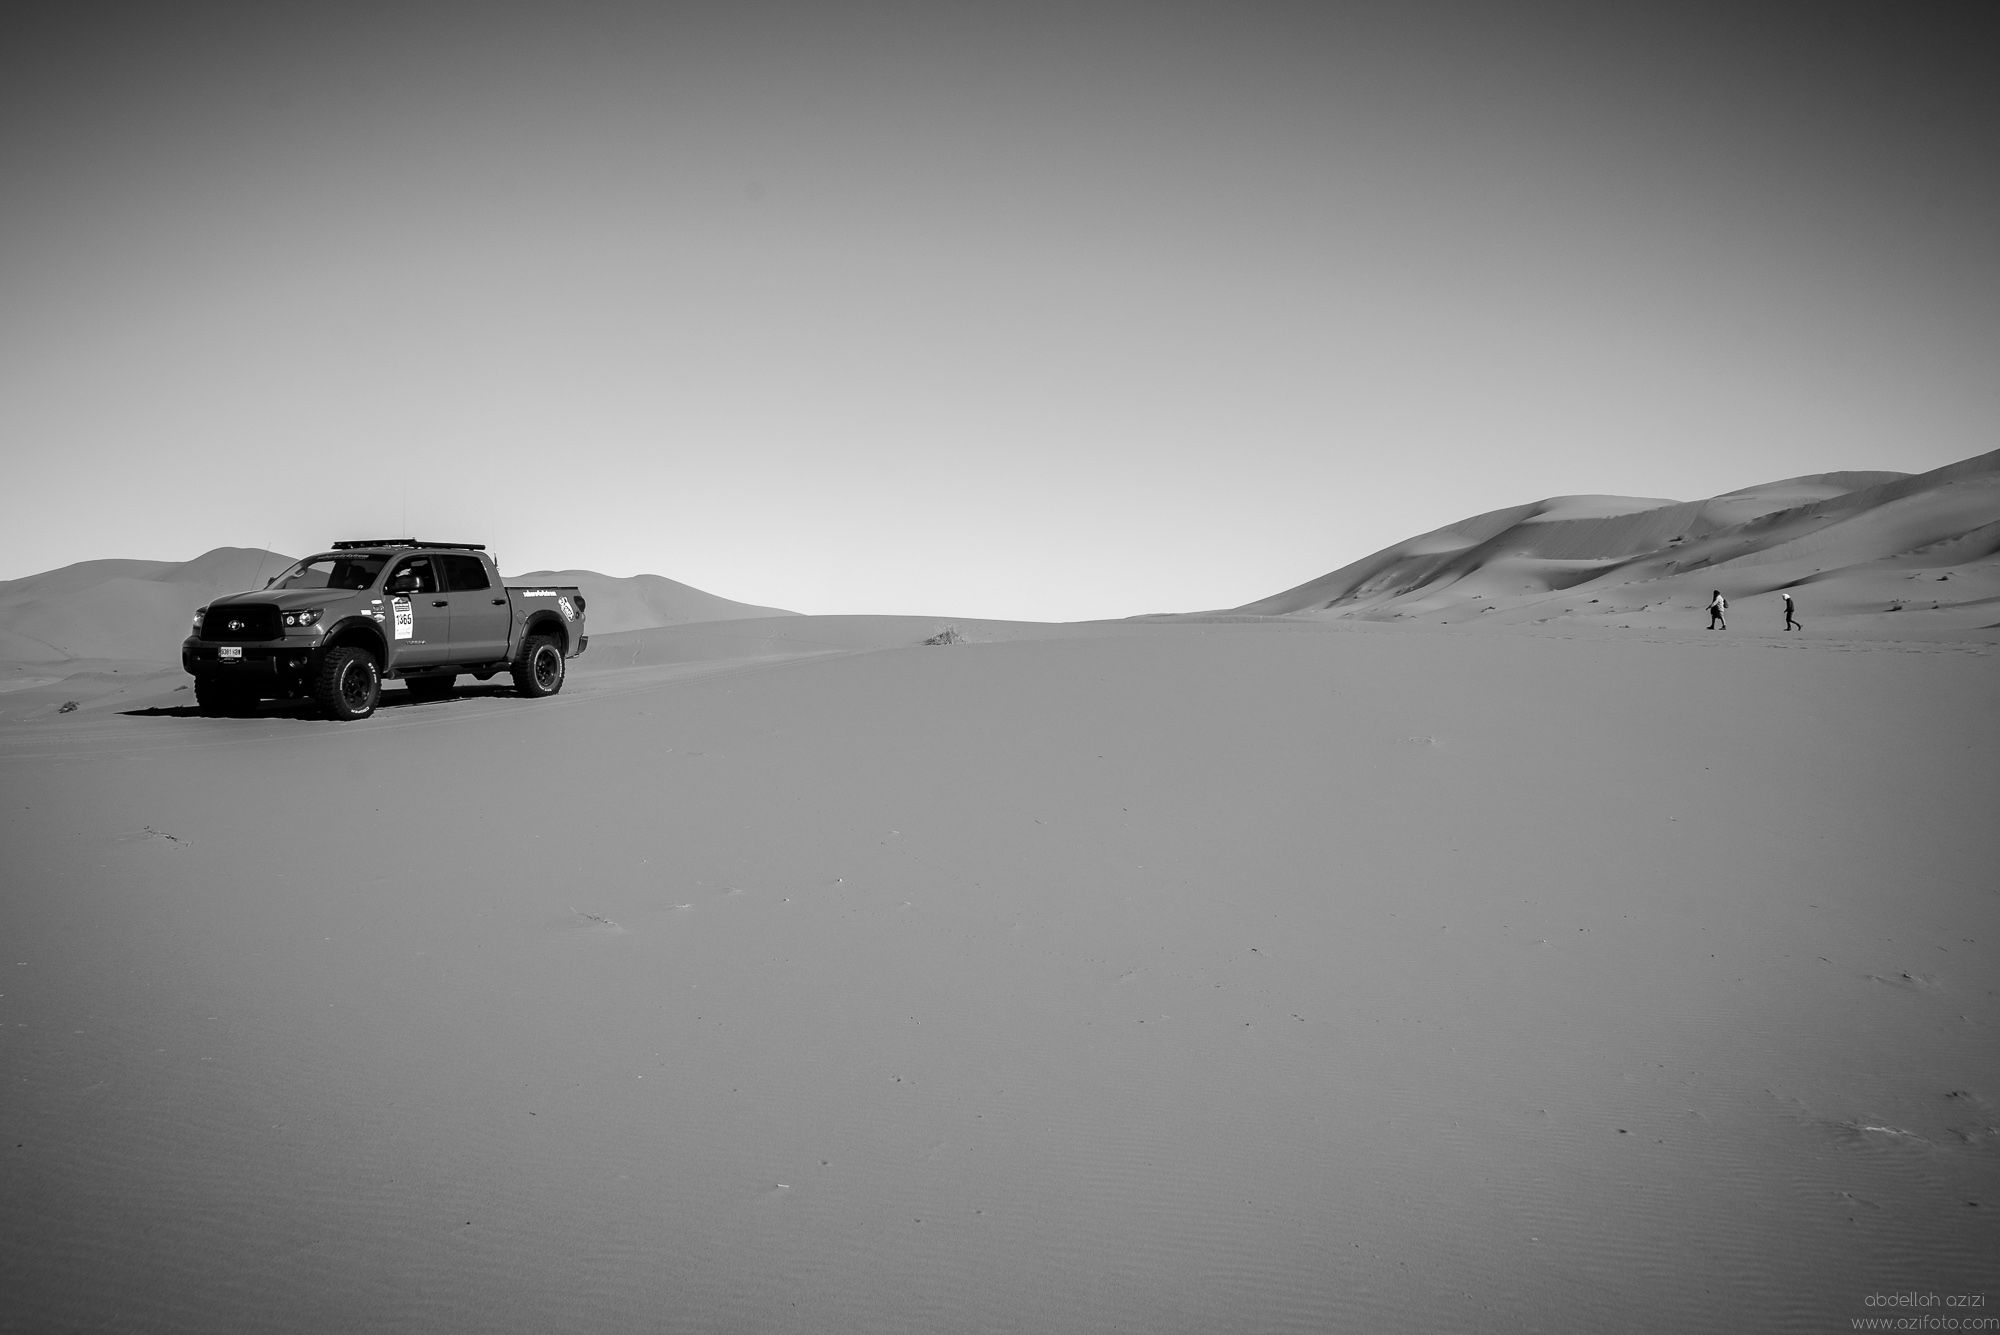 SUV truck in Sand dunes, Black and White Photo